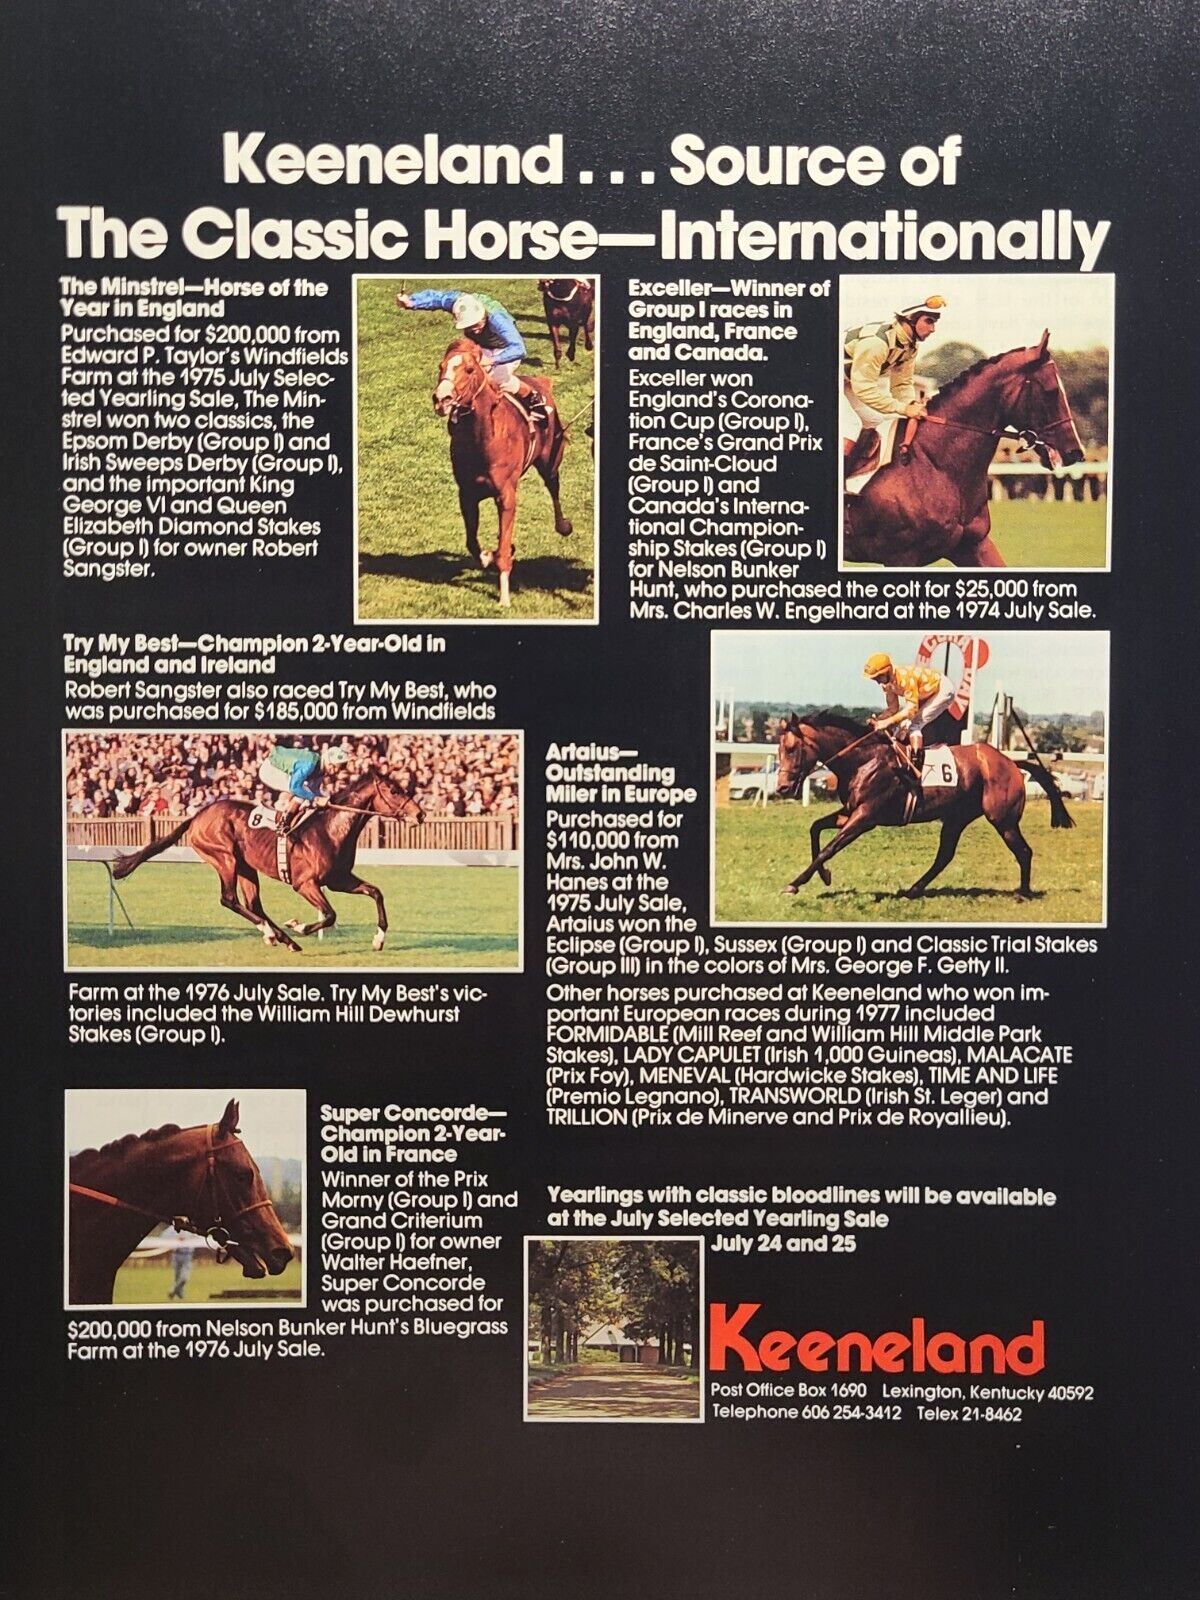 Keeneland Annual July Yearling Horse Sale Lexington KY Vintage Print Ad 1978